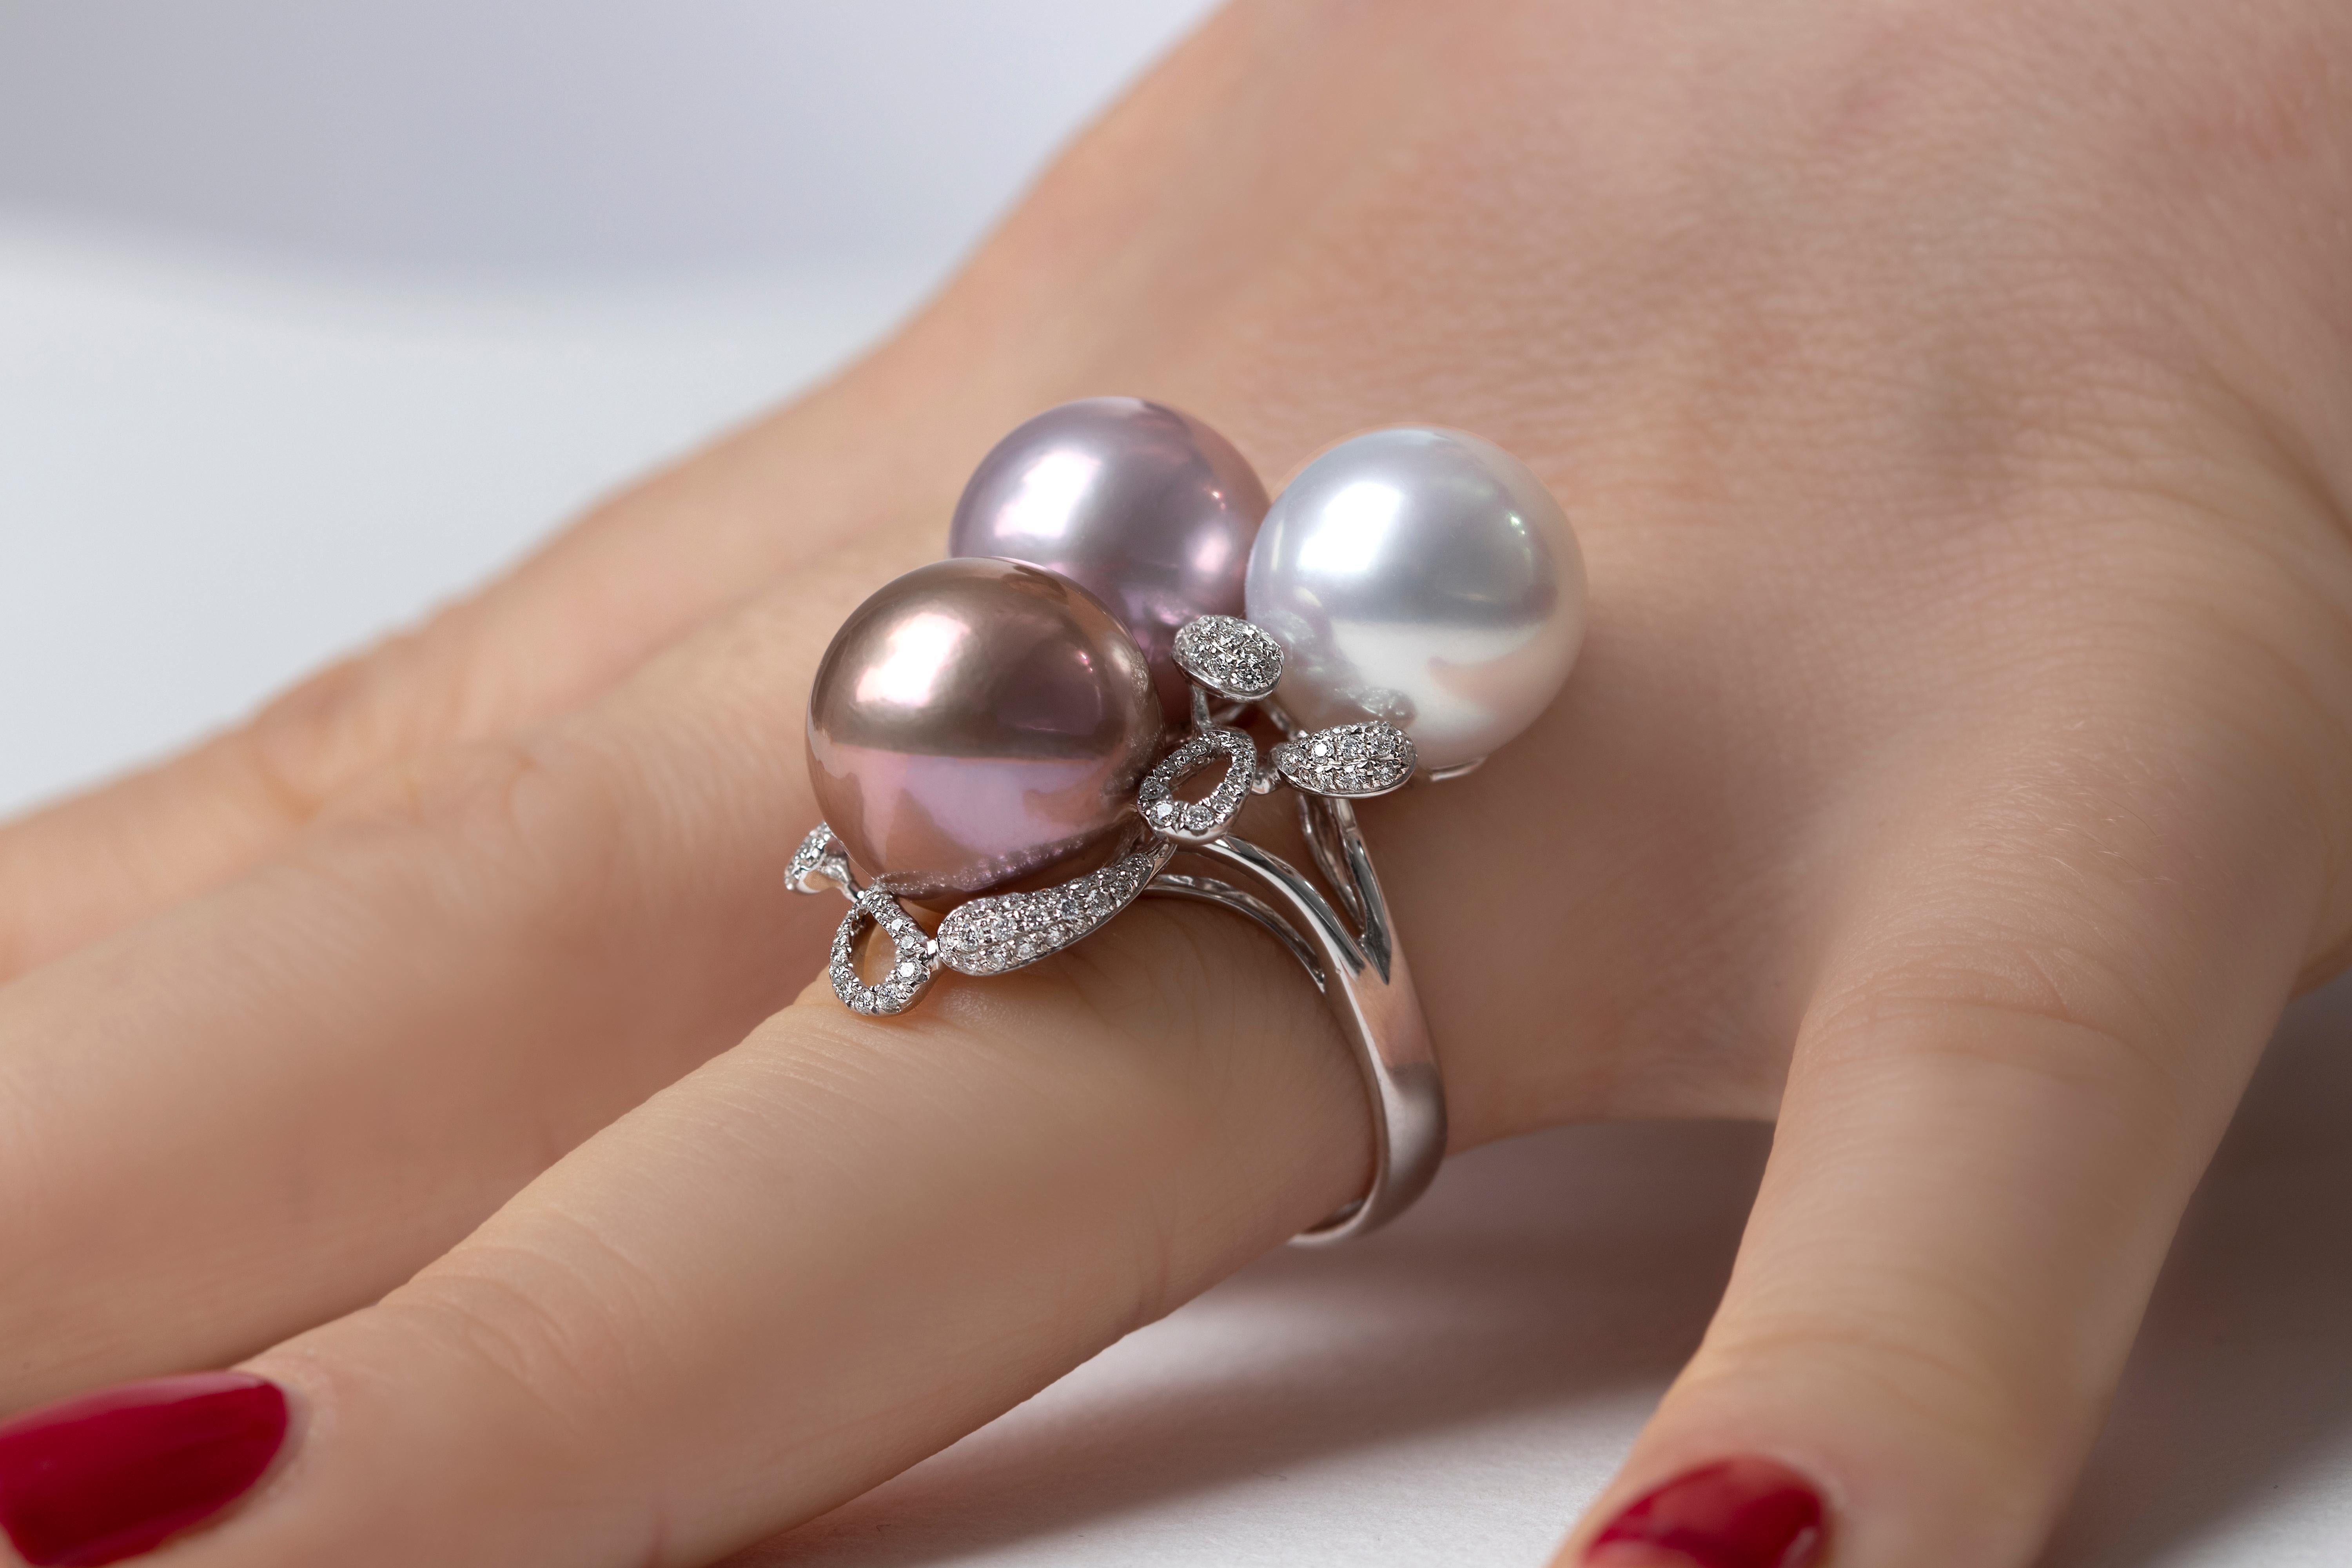 This exquisite ring by Yoko London features a lustrous crisp white South Sea pearl alongside two spectacular pink Freshwater pearls. The exceptional pearls are perfectly offset by the delicate diamonds which surround them. A perfect statement piece,